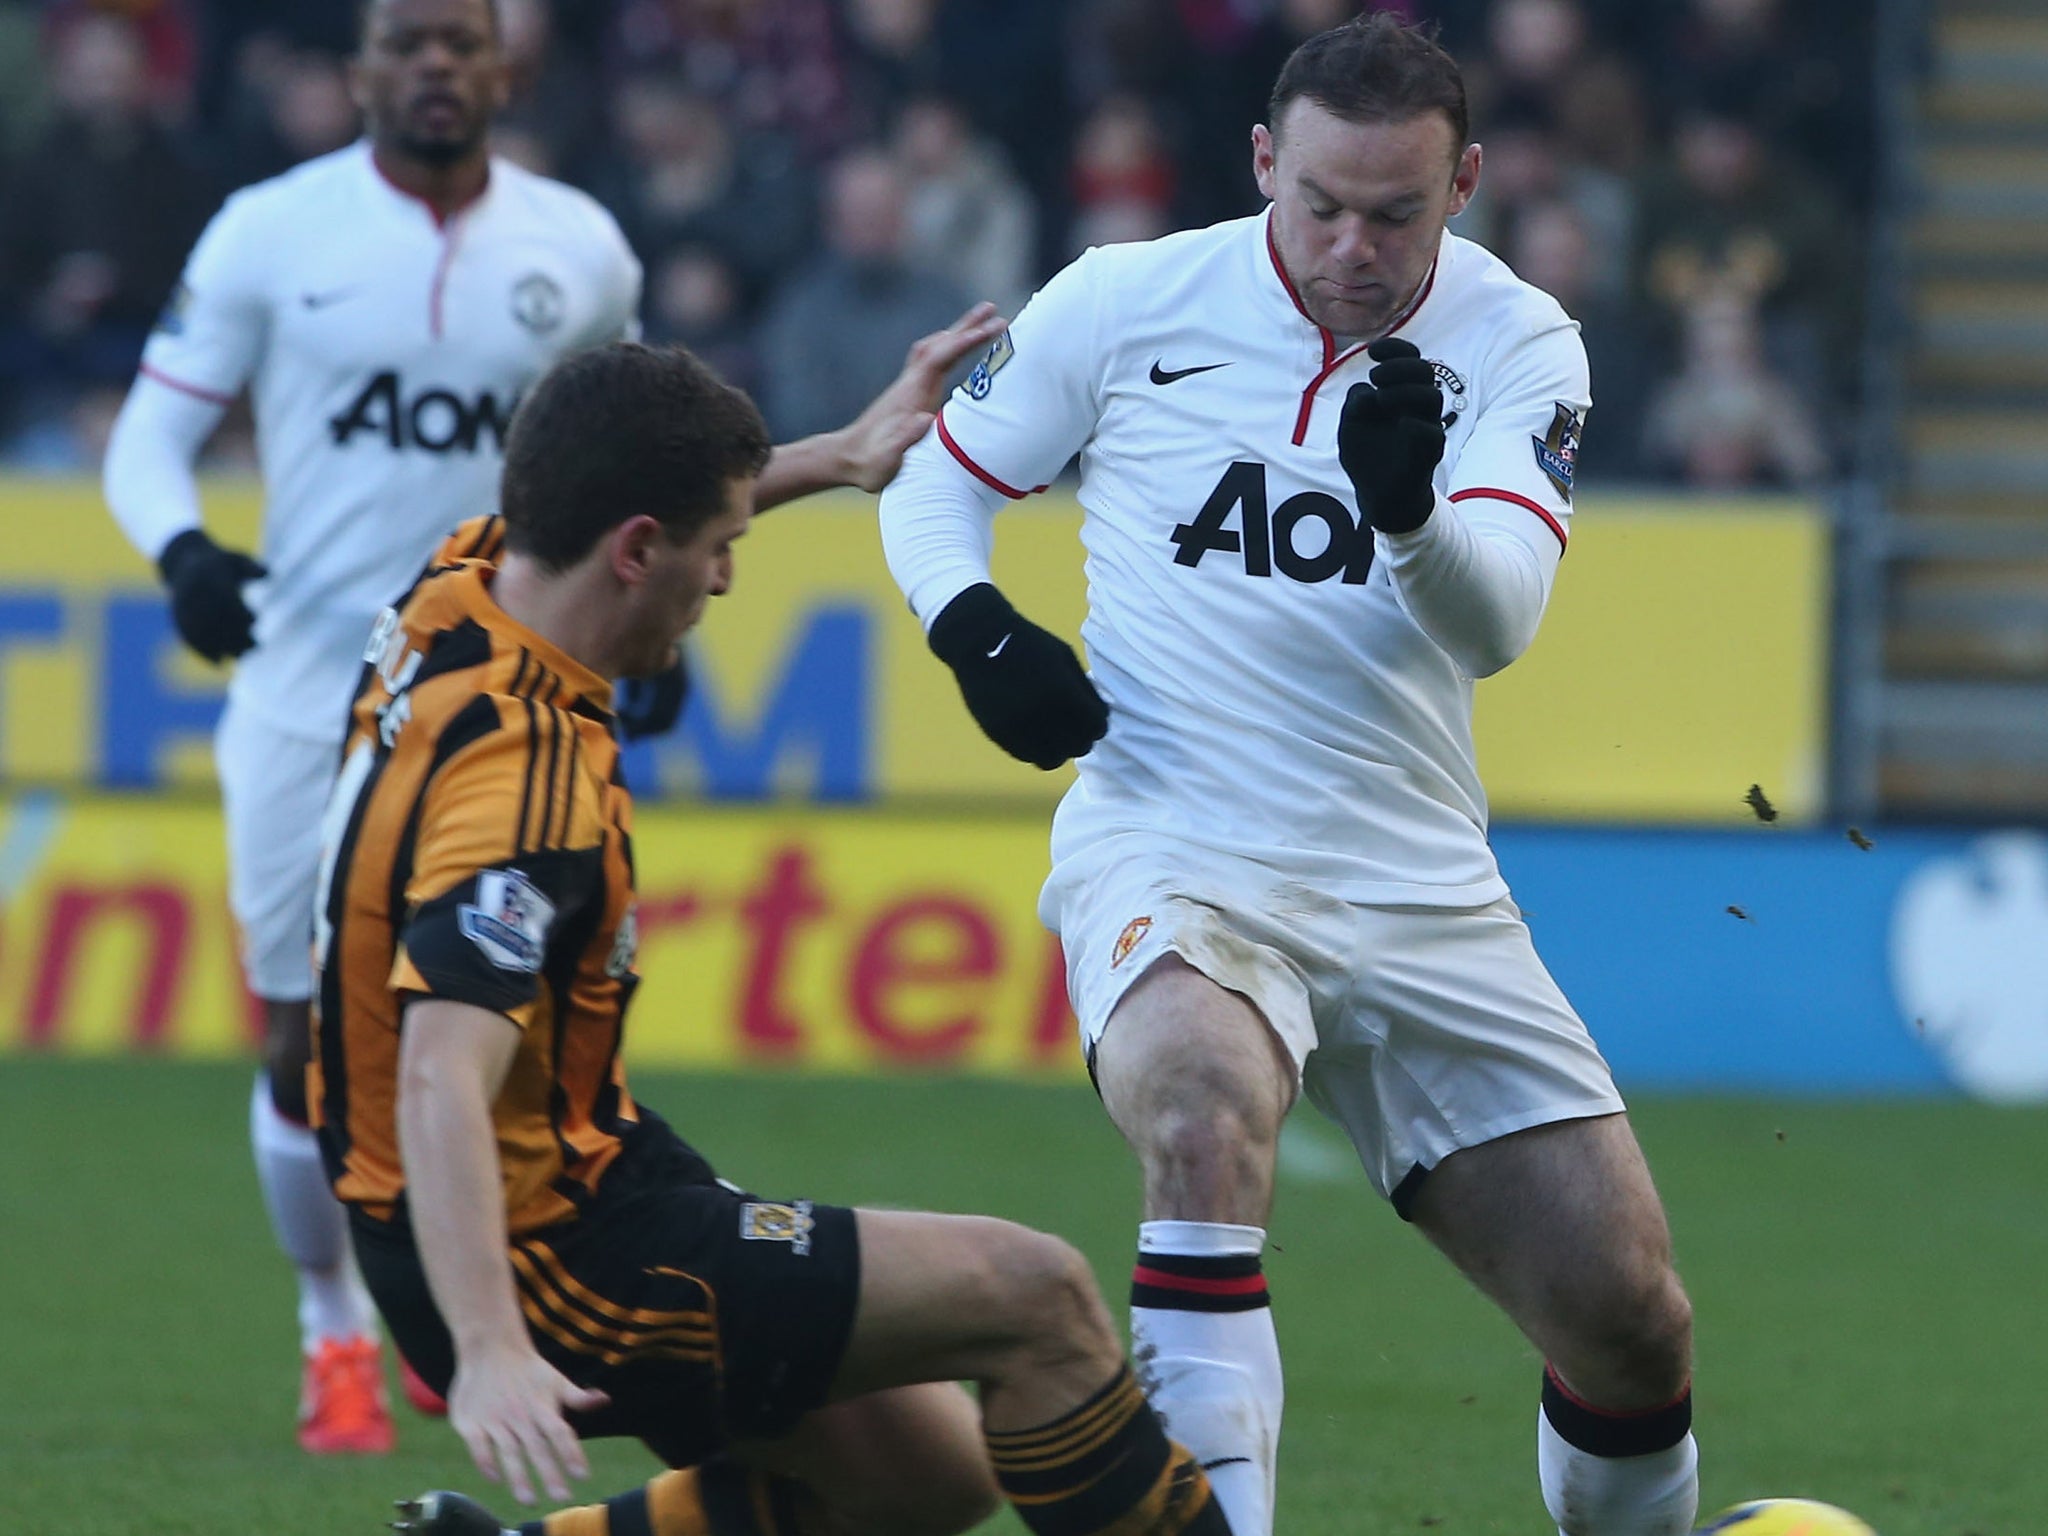 Wayne Rooney scored his 150th goal for Manchester United in the 3-2 win over Hull City